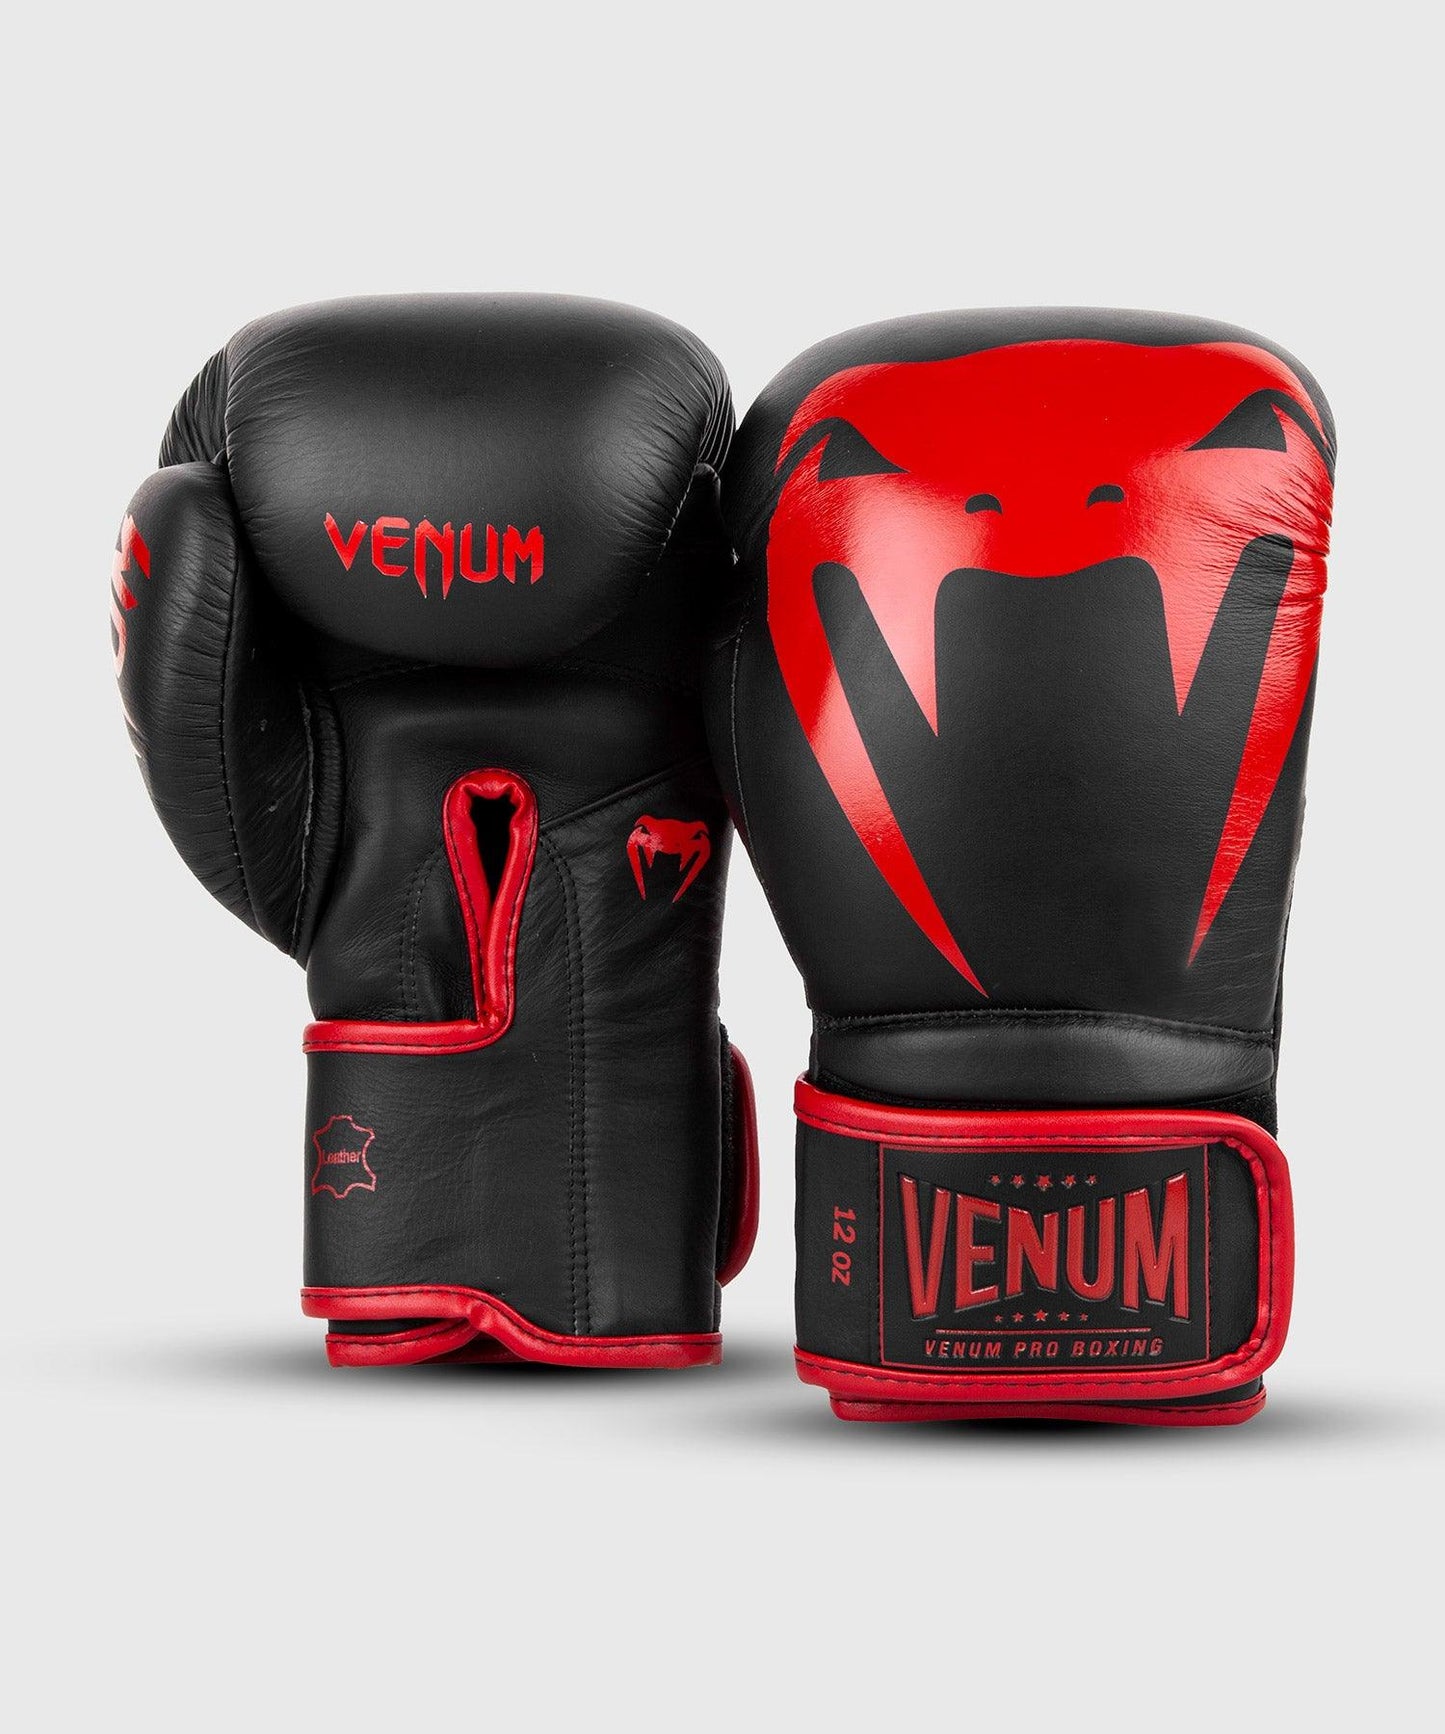 Venum Giant 2.0 Pro Boxing Gloves Velcro - Black/Red Picture 3